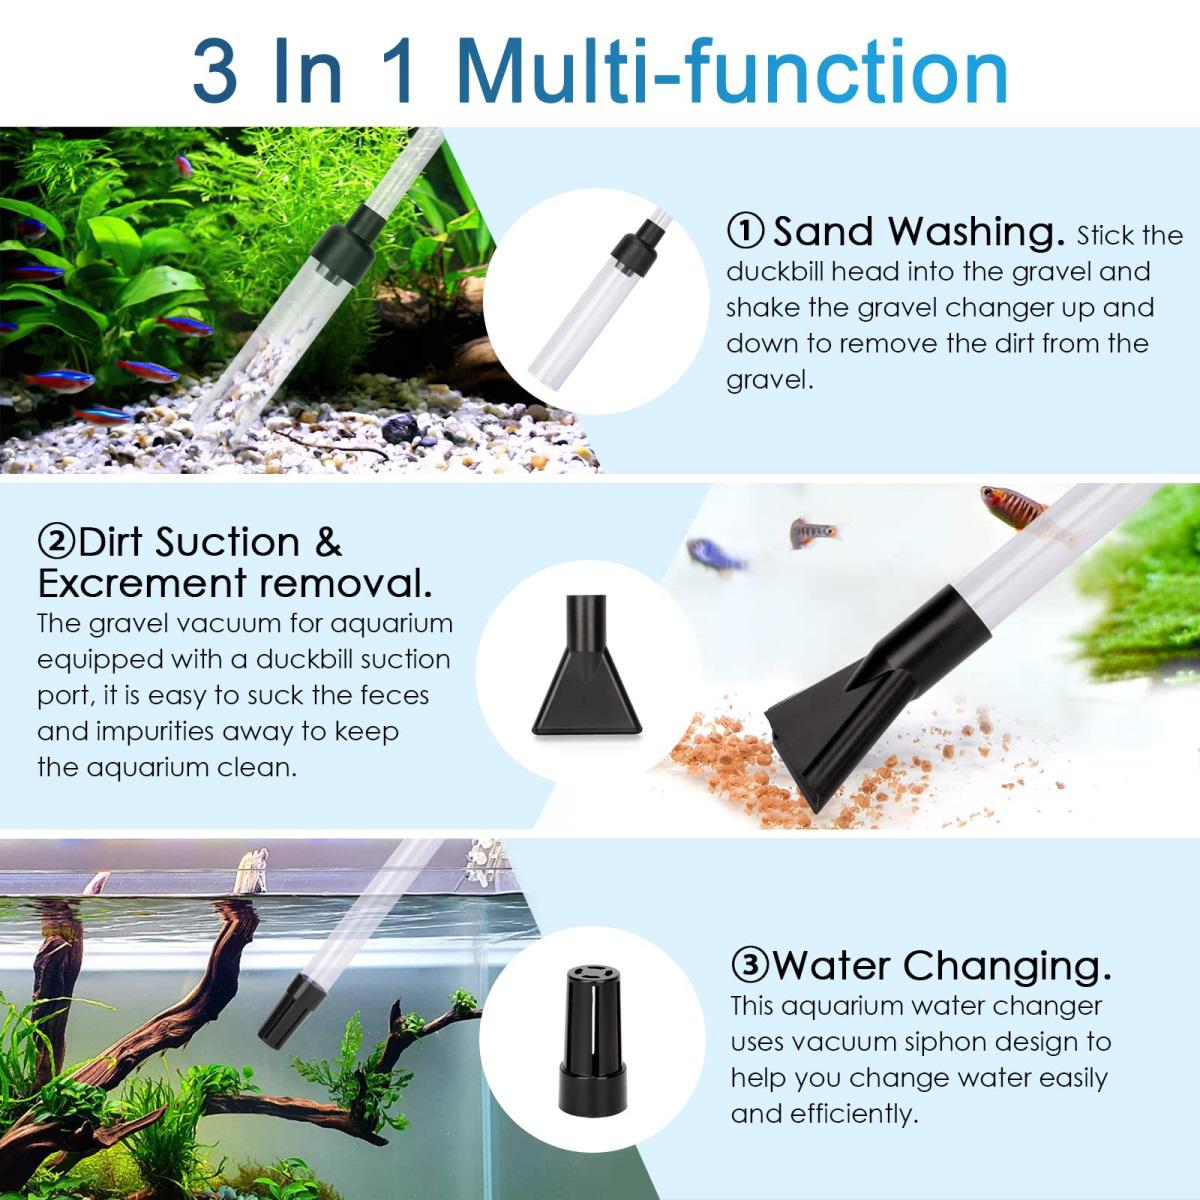 Aquarium Gravel Cleaner, Fish Tank Gravel Cleaner, Vacuum Syphon Pump  Cleaning Kit Hand Siphon Pump For Fish Tank, Water Changing And Filter Sand  Clea